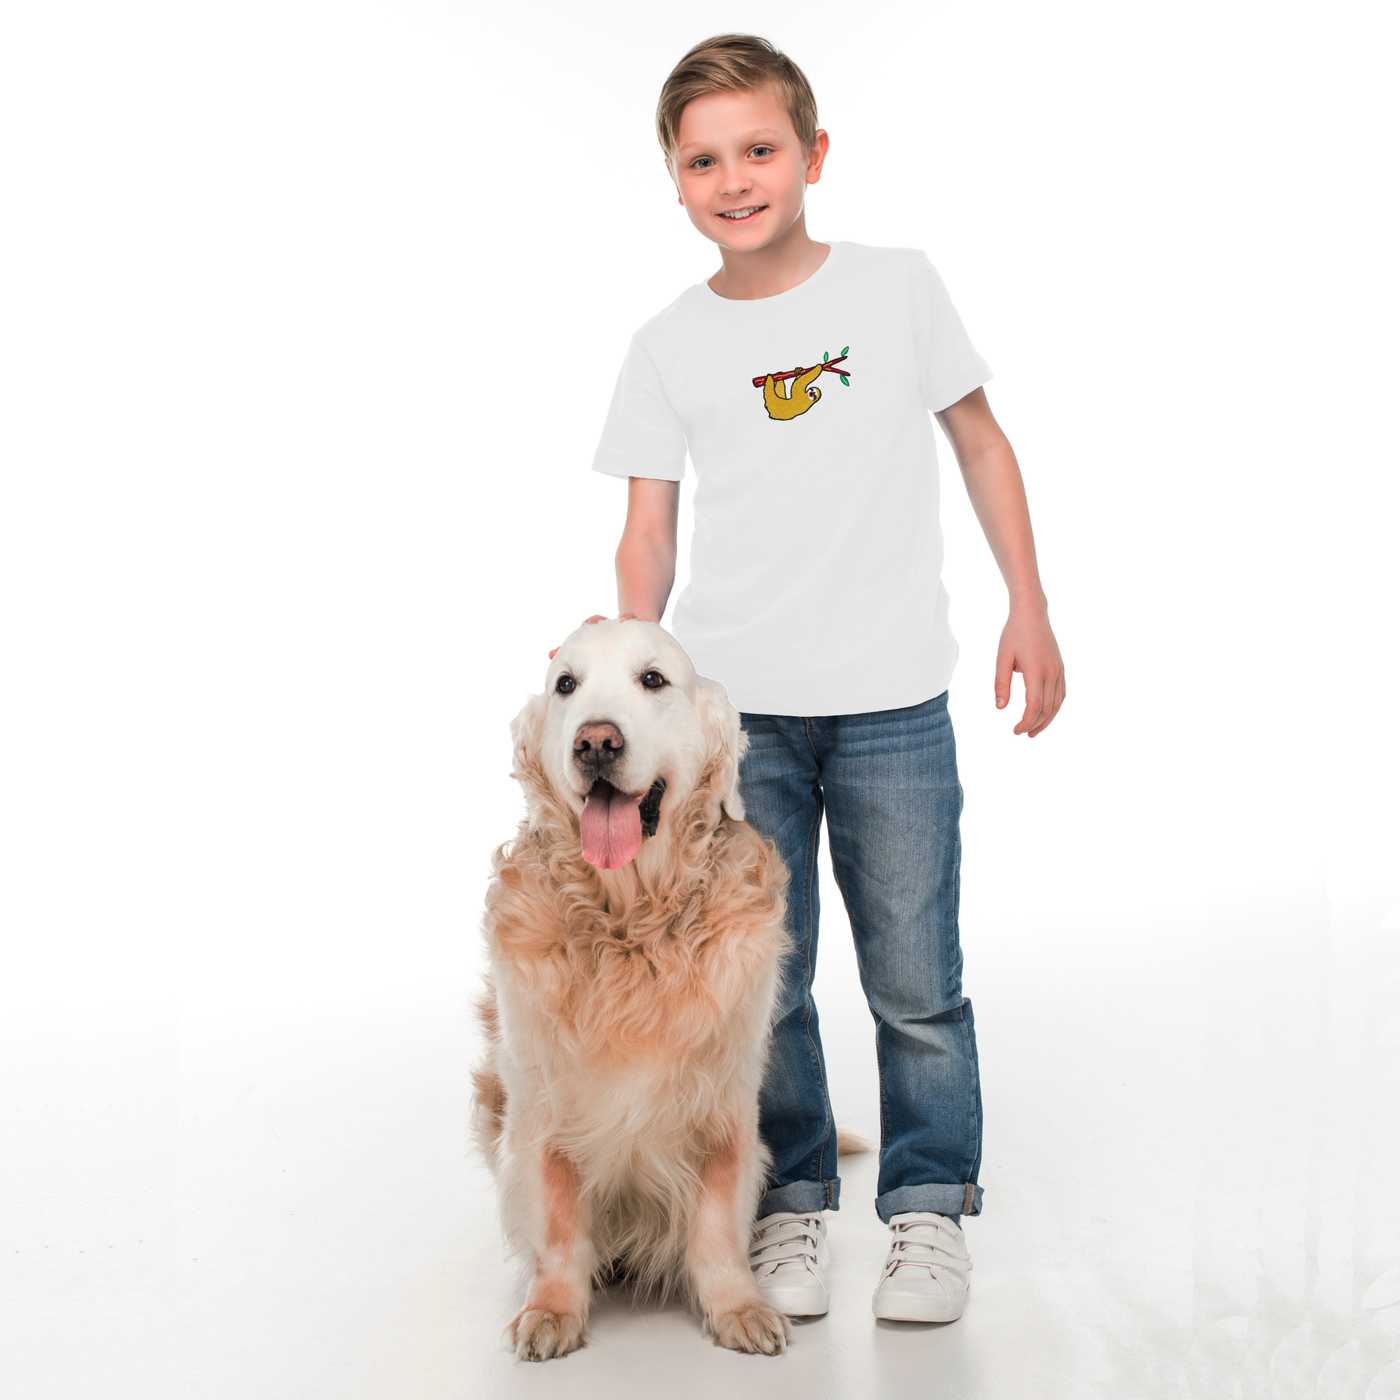 Bobby's Planet Kids Embroidered Sloth T-Shirt from South American Amazon Animals Collection in White Color#color_white